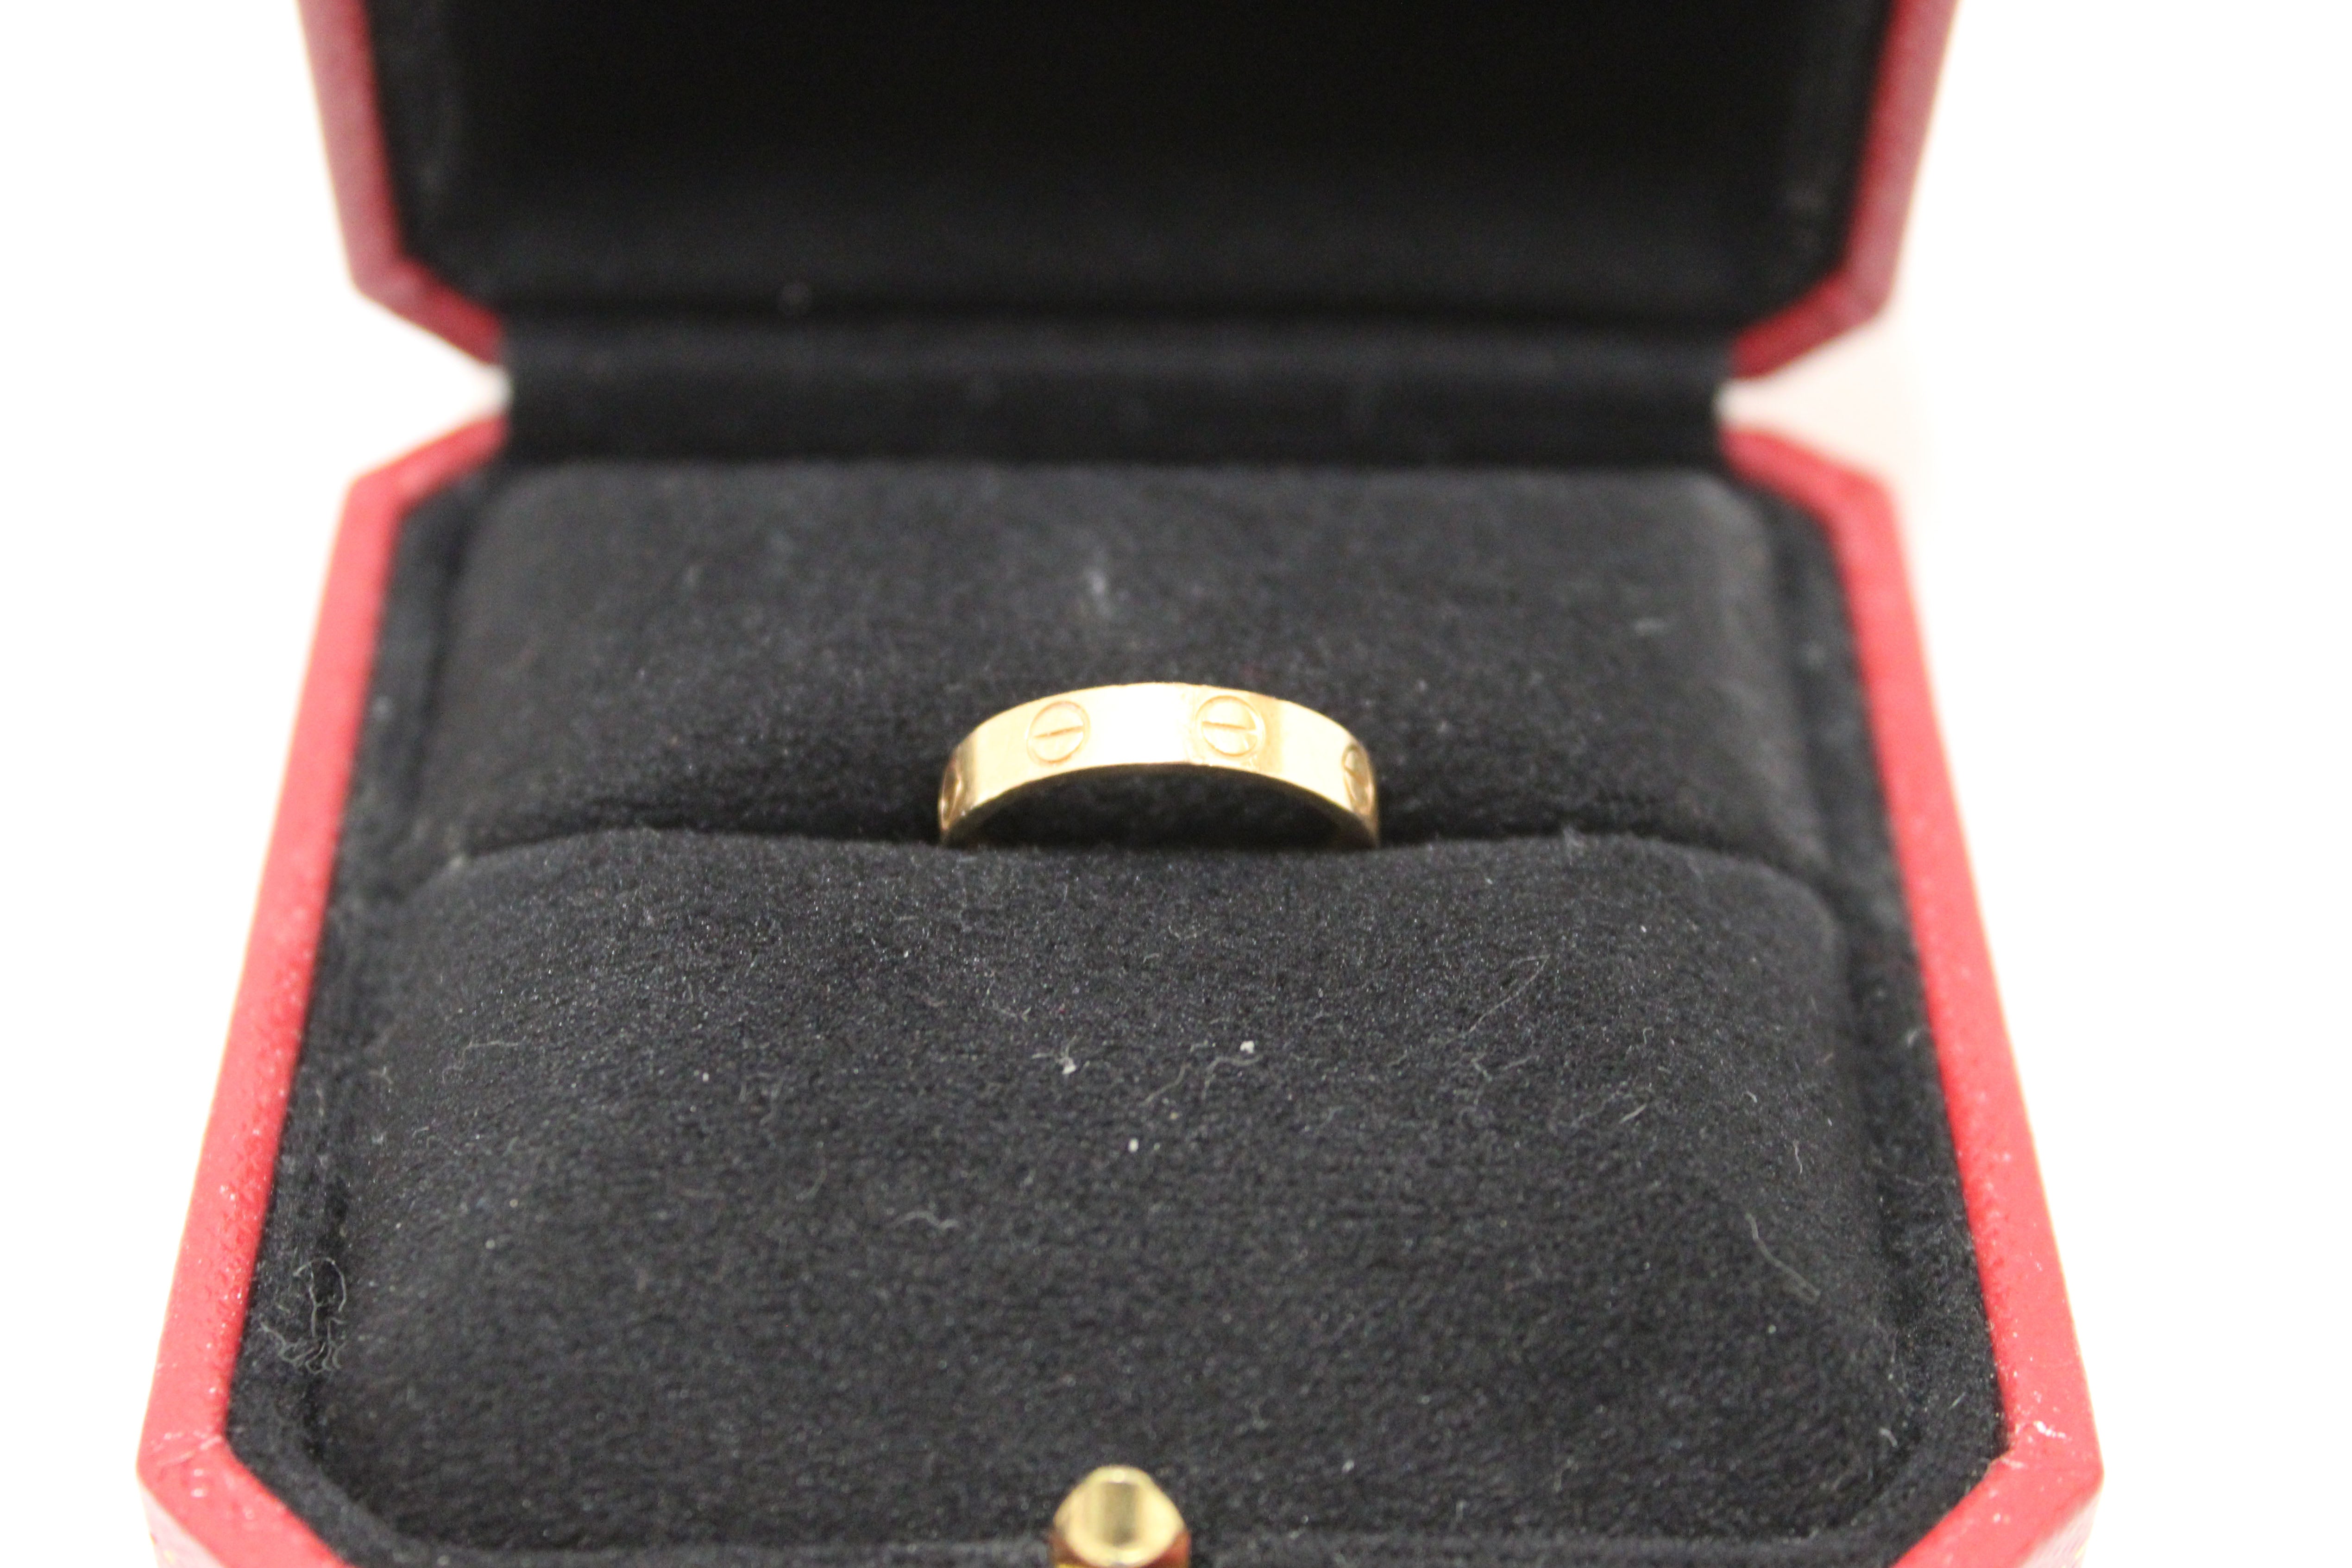 Authentic Cartier 18K Rose Gold Love Wedding Band Ring Size 5